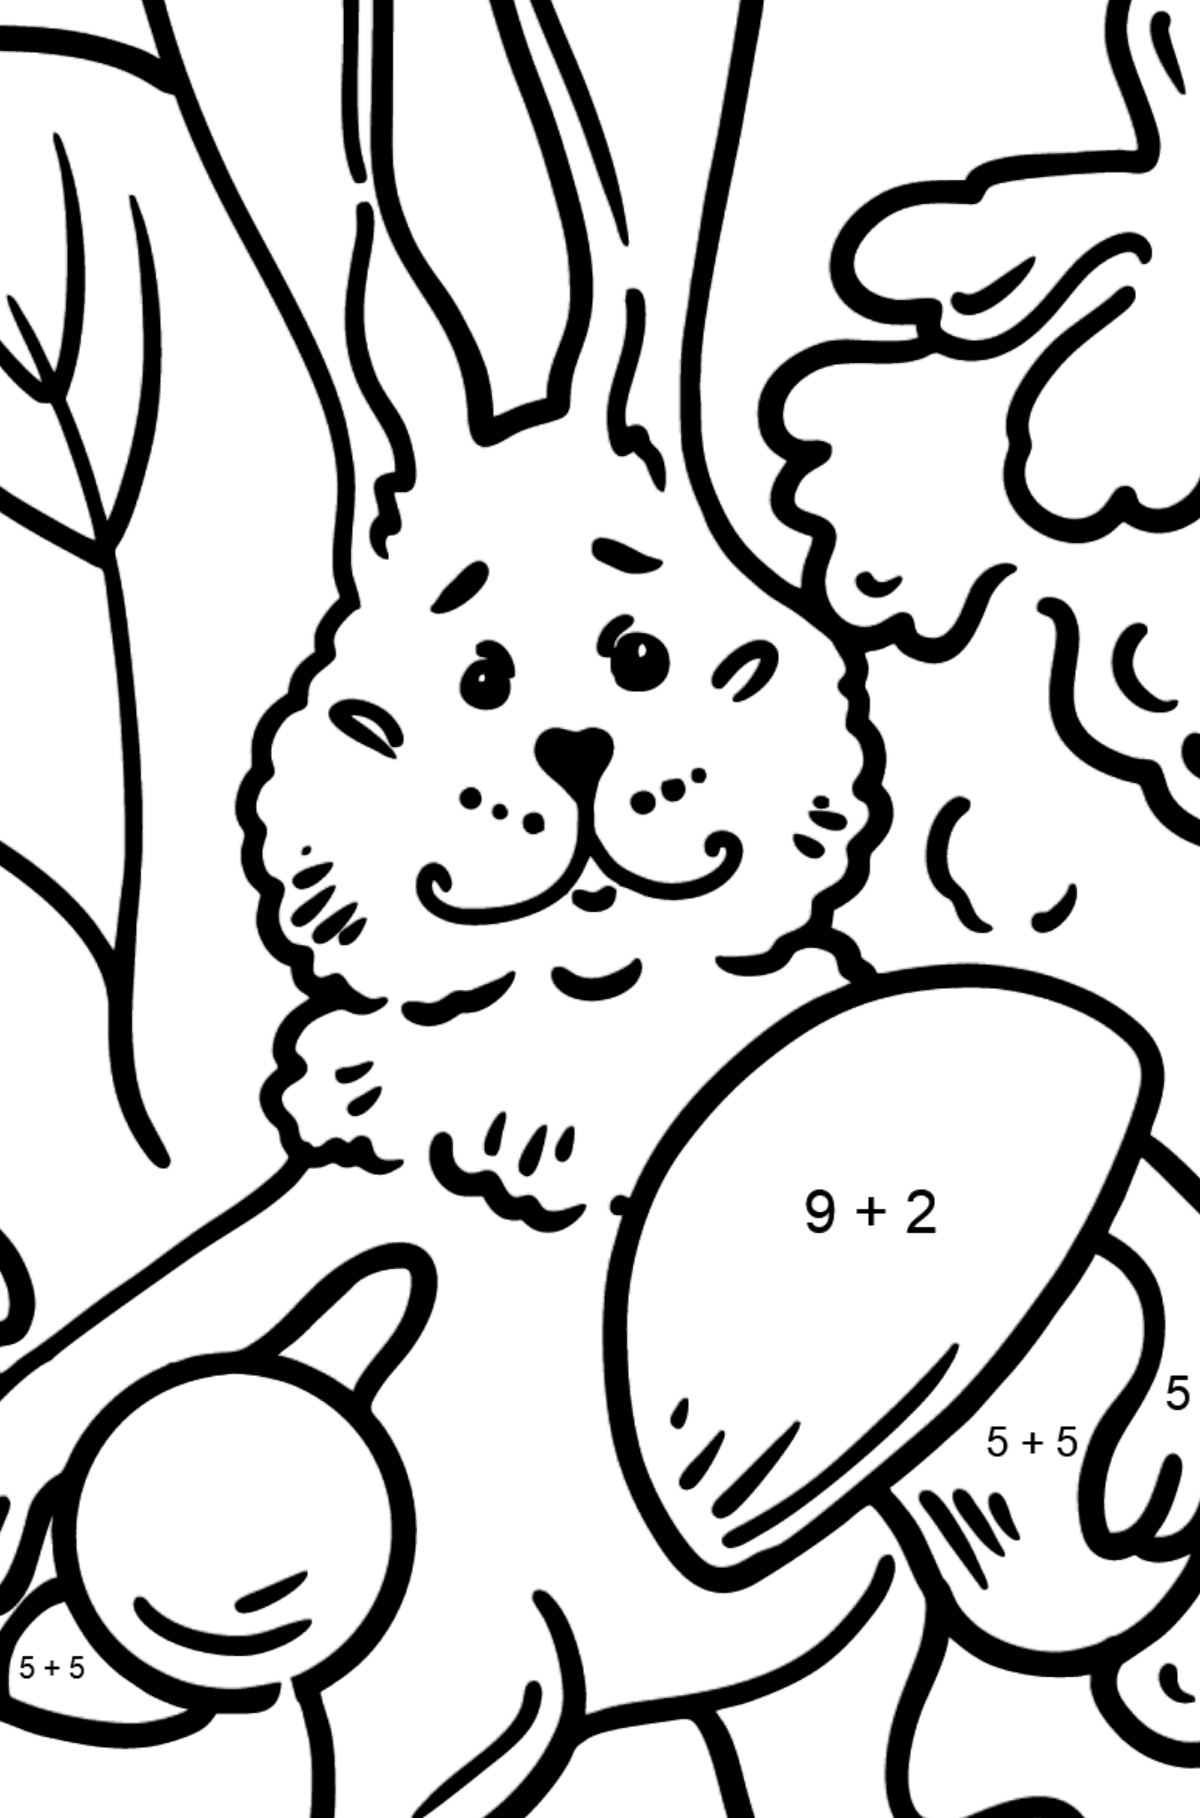 Bunny in the Forest coloring page - Math Coloring - Addition for Kids